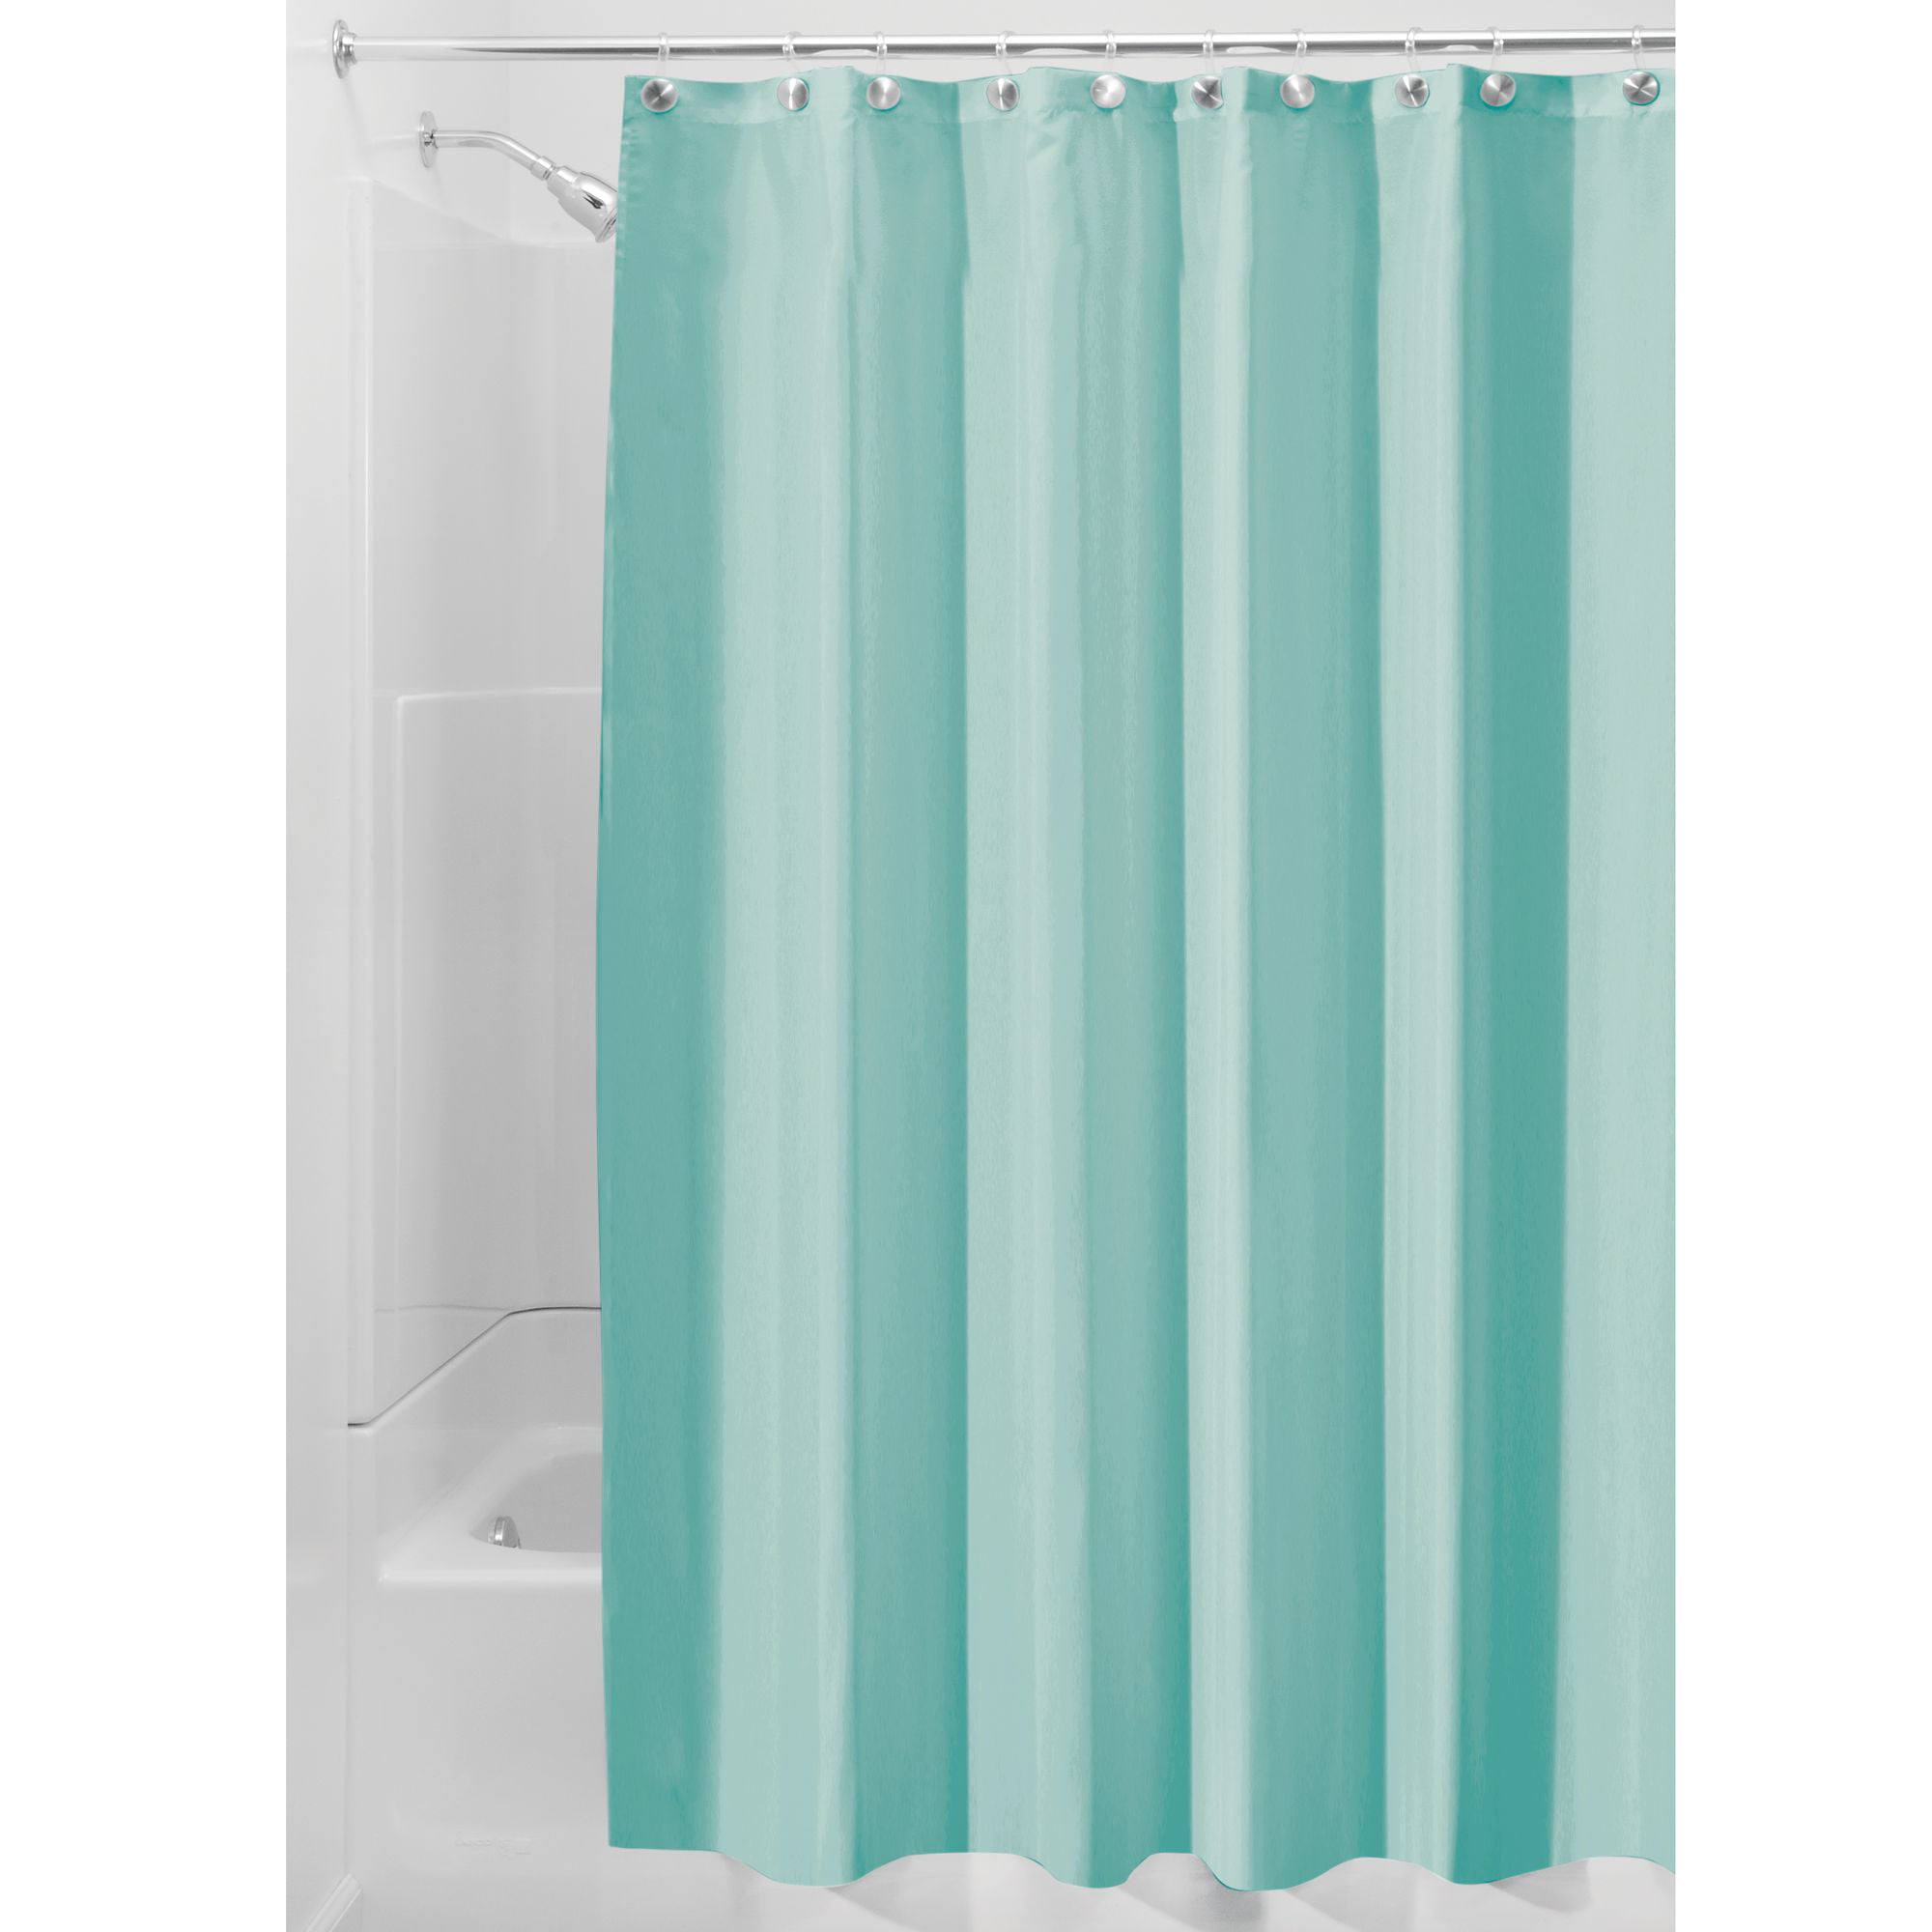 Carnation Home "Pockets" PEVA Shower Curtain in Super Clear 